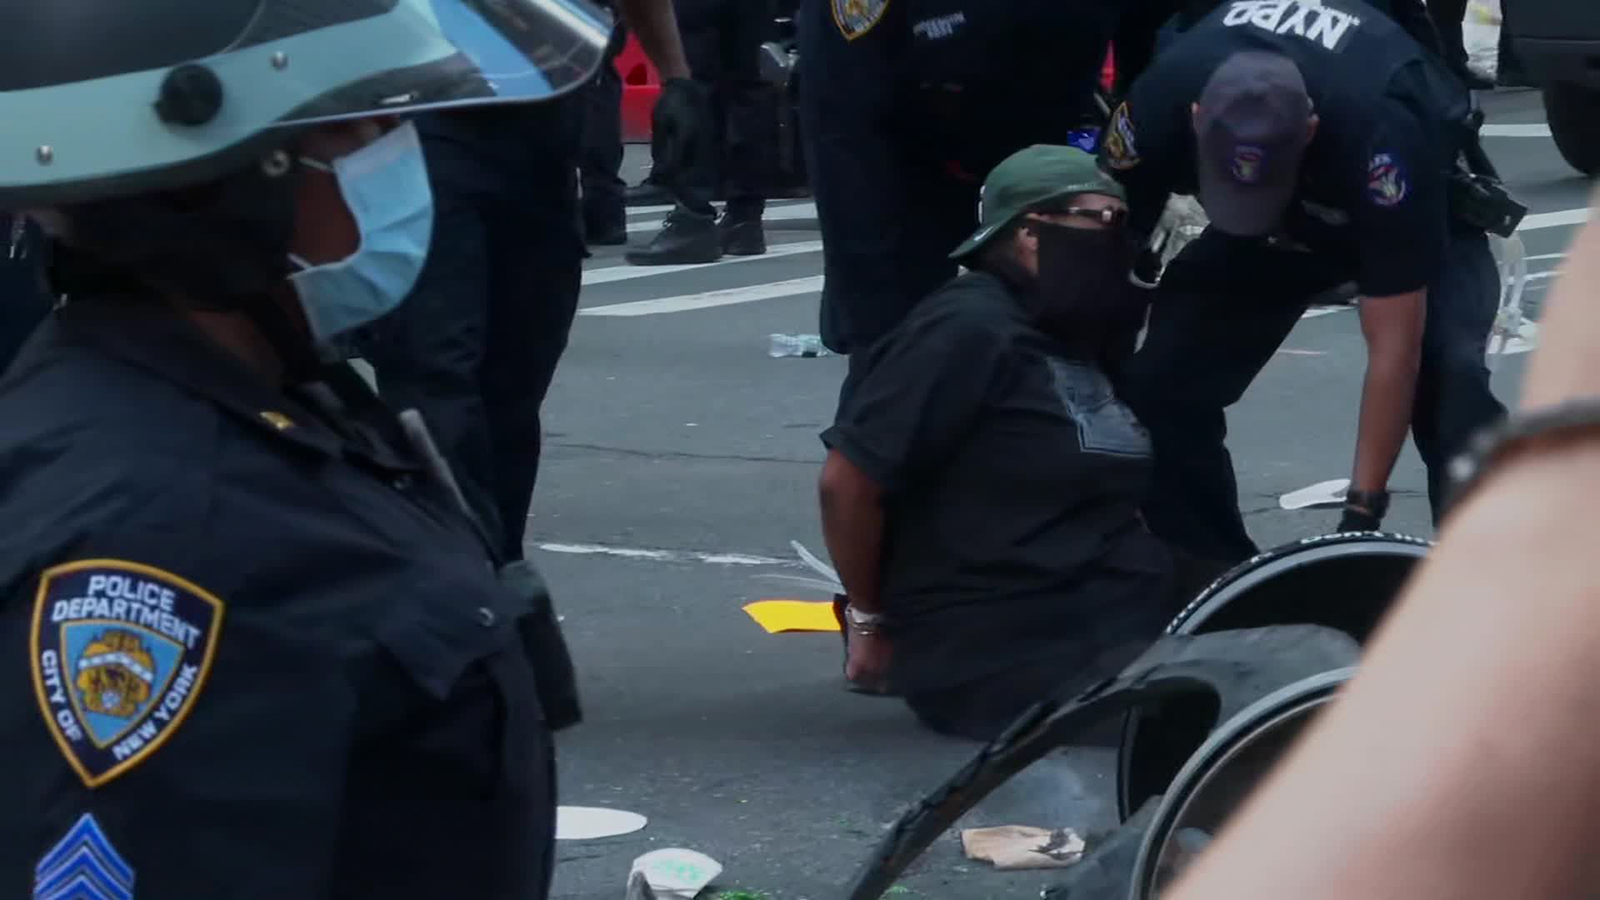 More Than 2 Dozen Protest Related Arrests Made In New York City